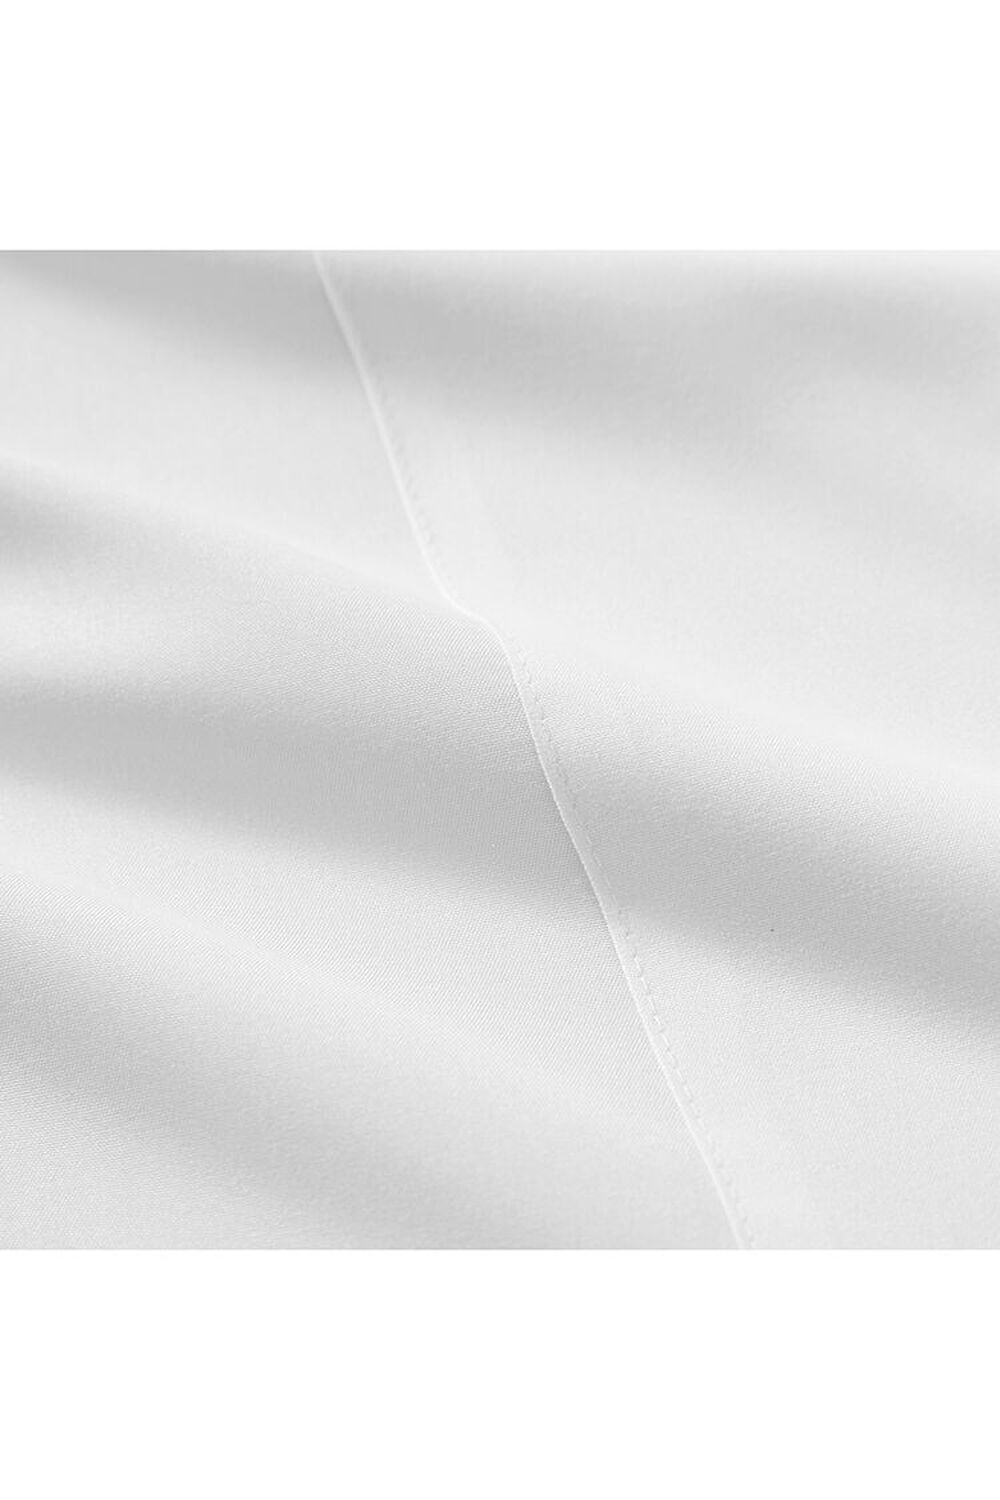 WHITE Queen-Sized Sheet Set, image 3